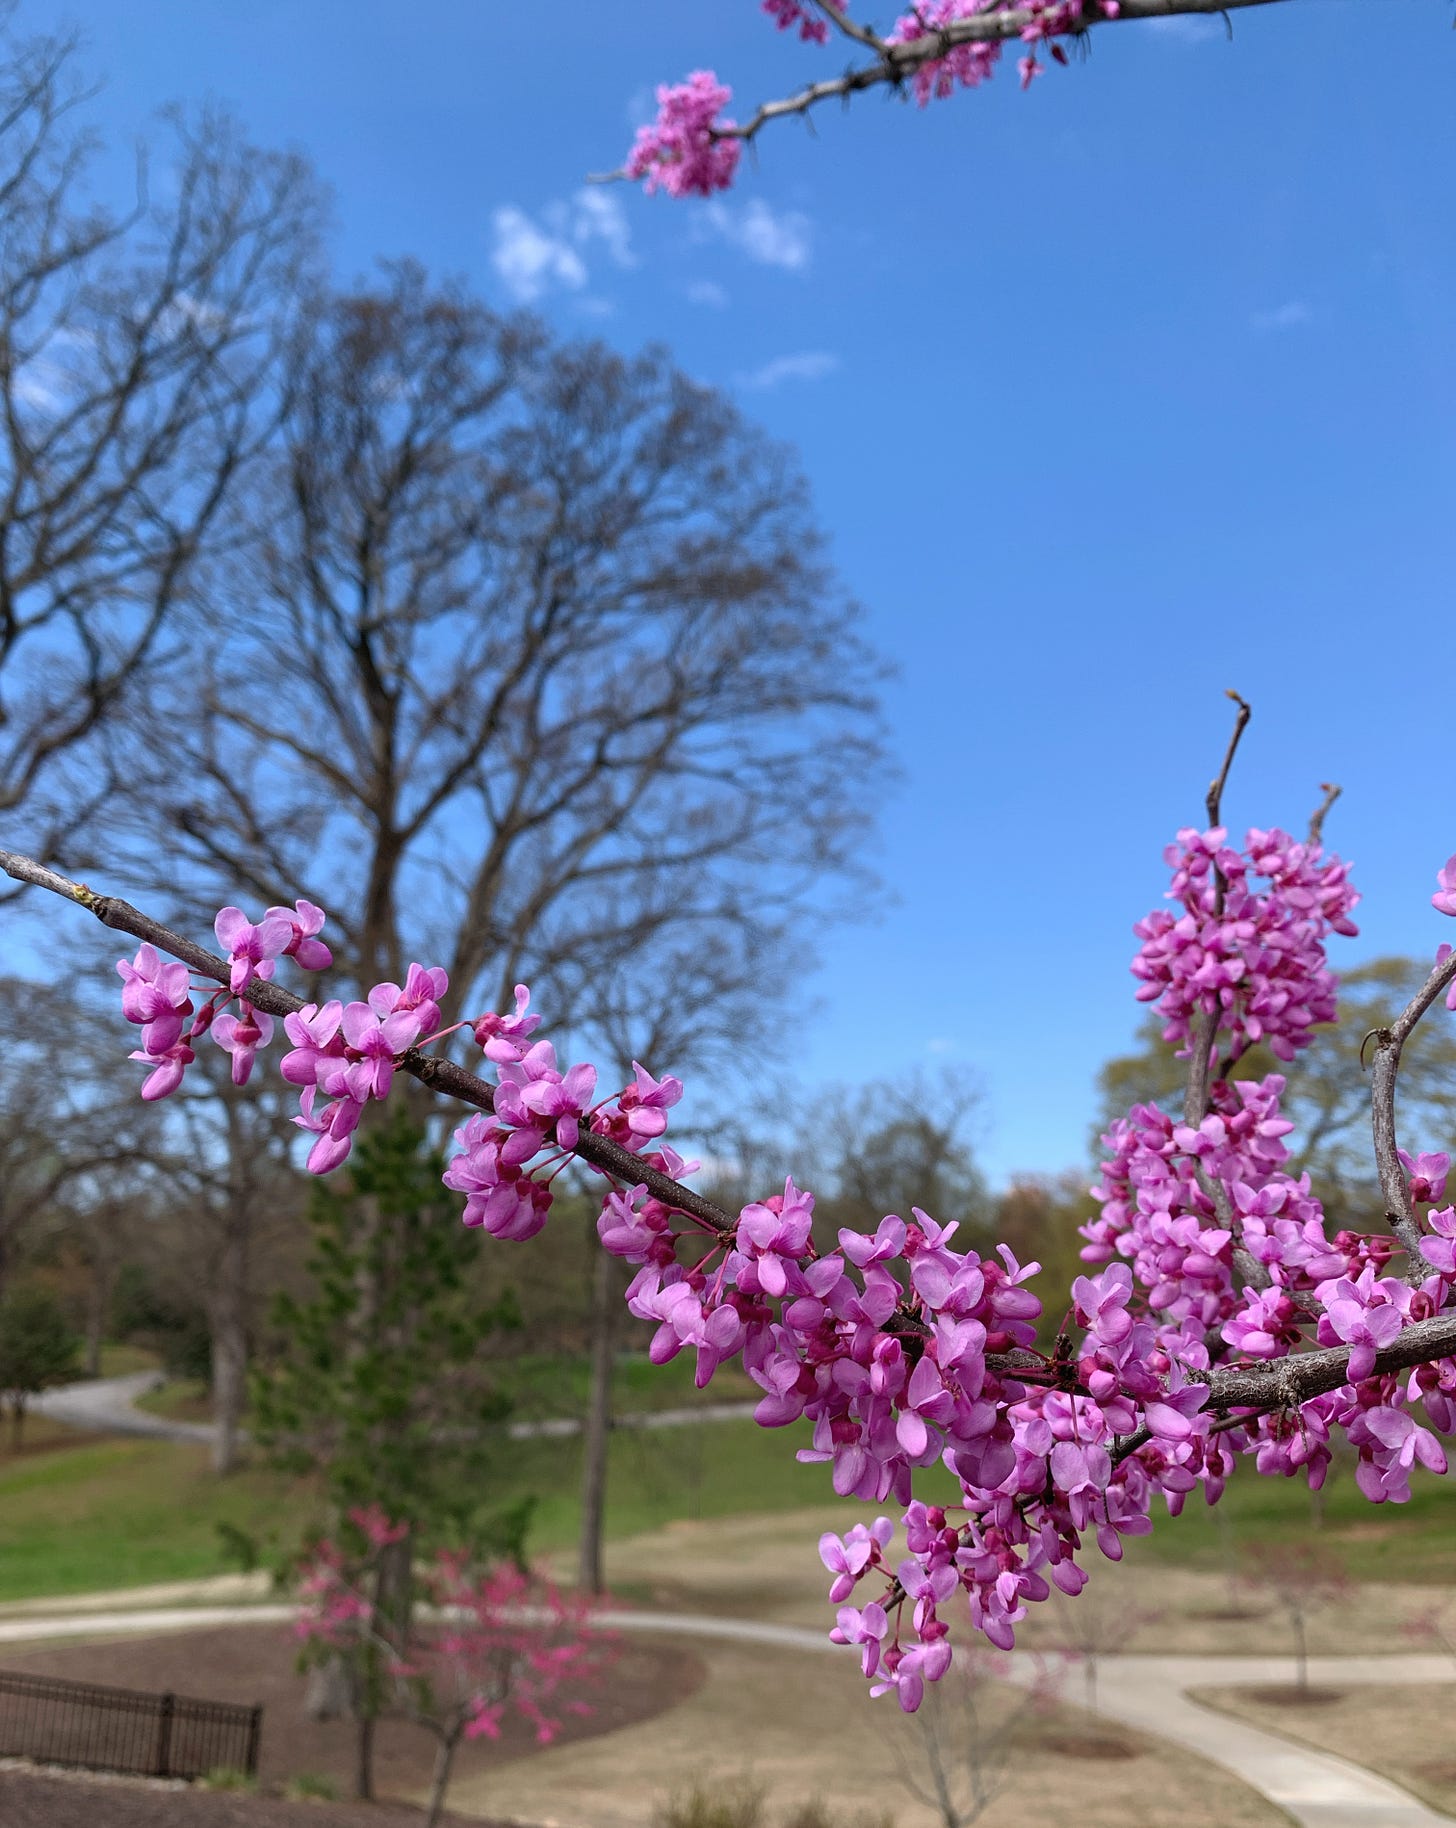 Redbud branches on a bright, sunny day at a park. The sky is bright blue and almost cloudless.